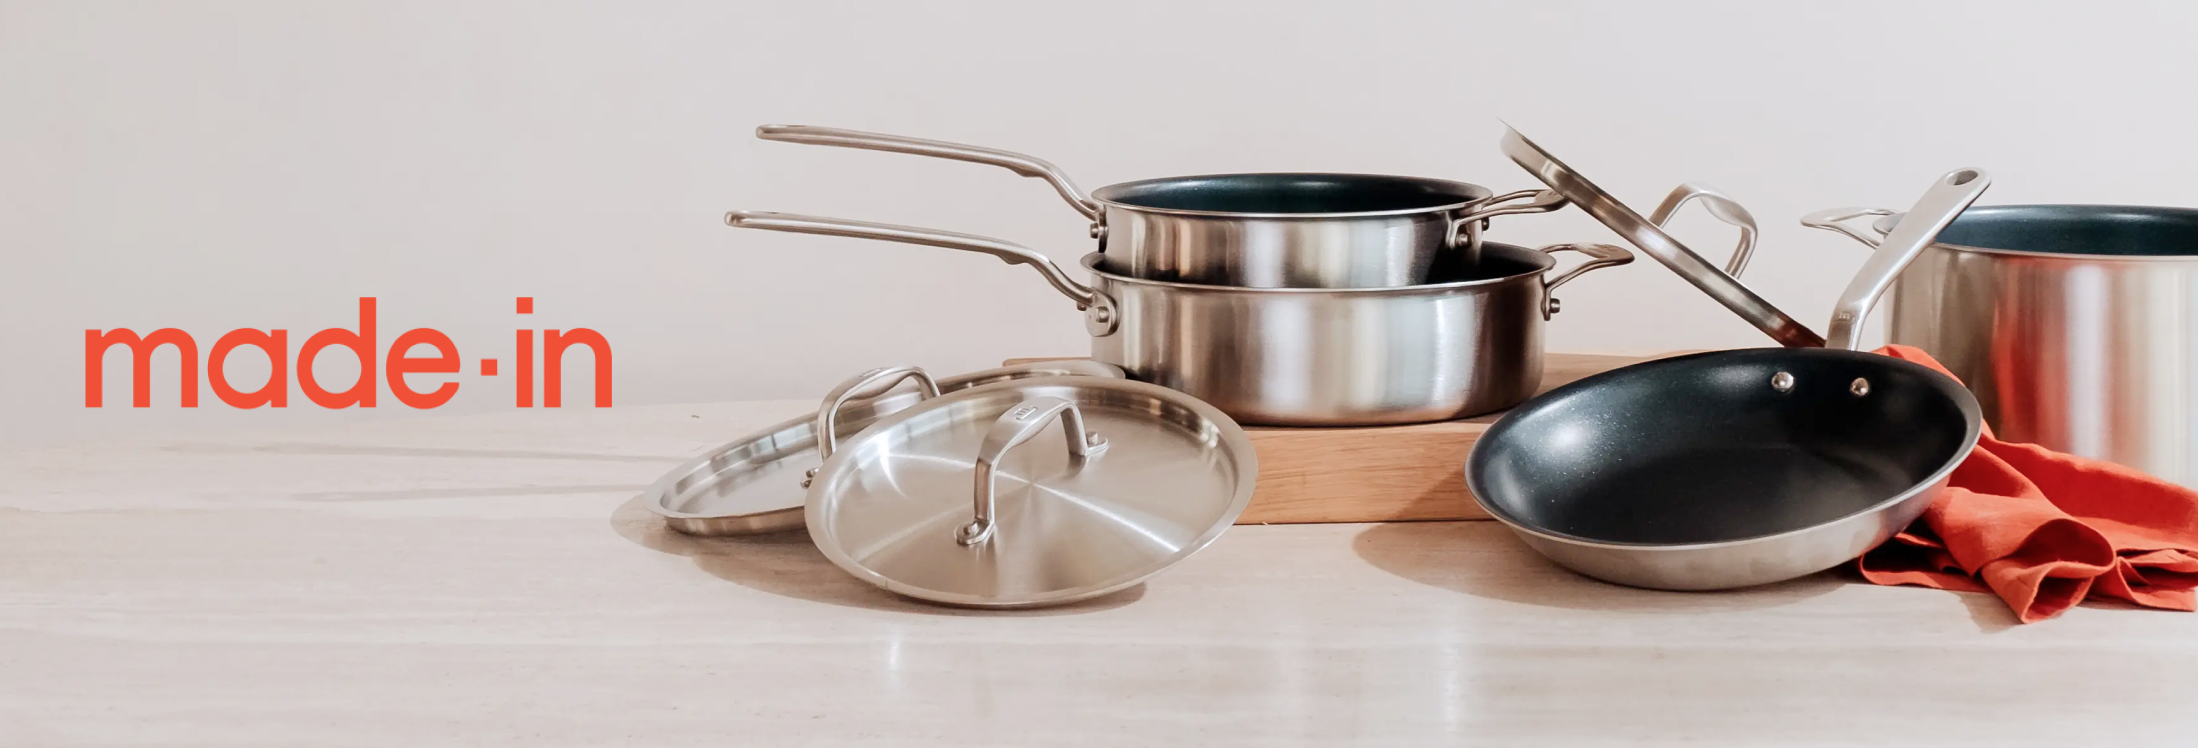 Made In Is Elevating Kitchens for Home Cooks and Professional Chefs